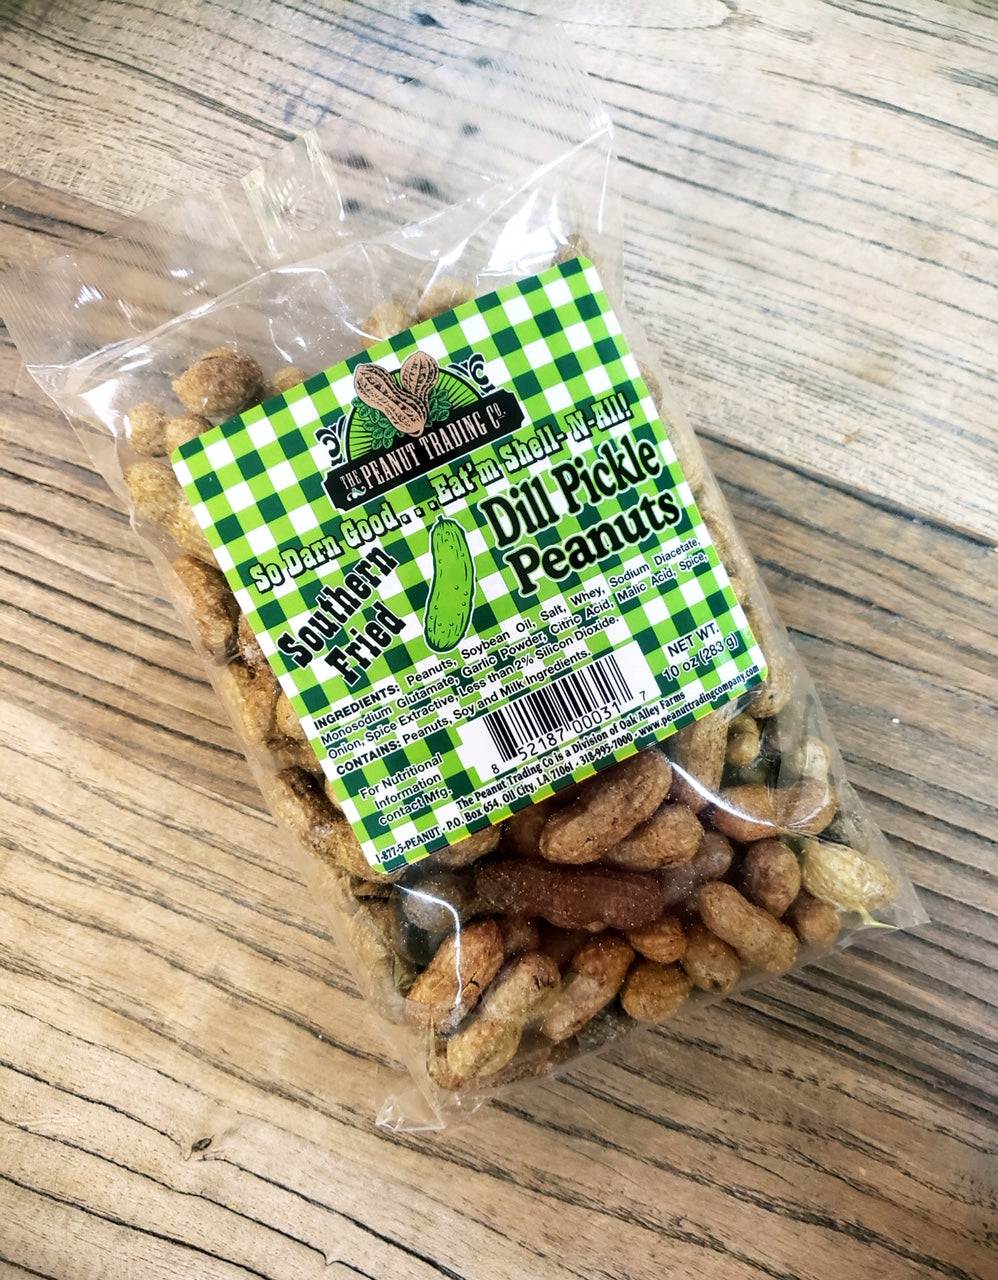 Peanut Trading Company - Deep Fried Peanuts Counter Display - Dill Pickle